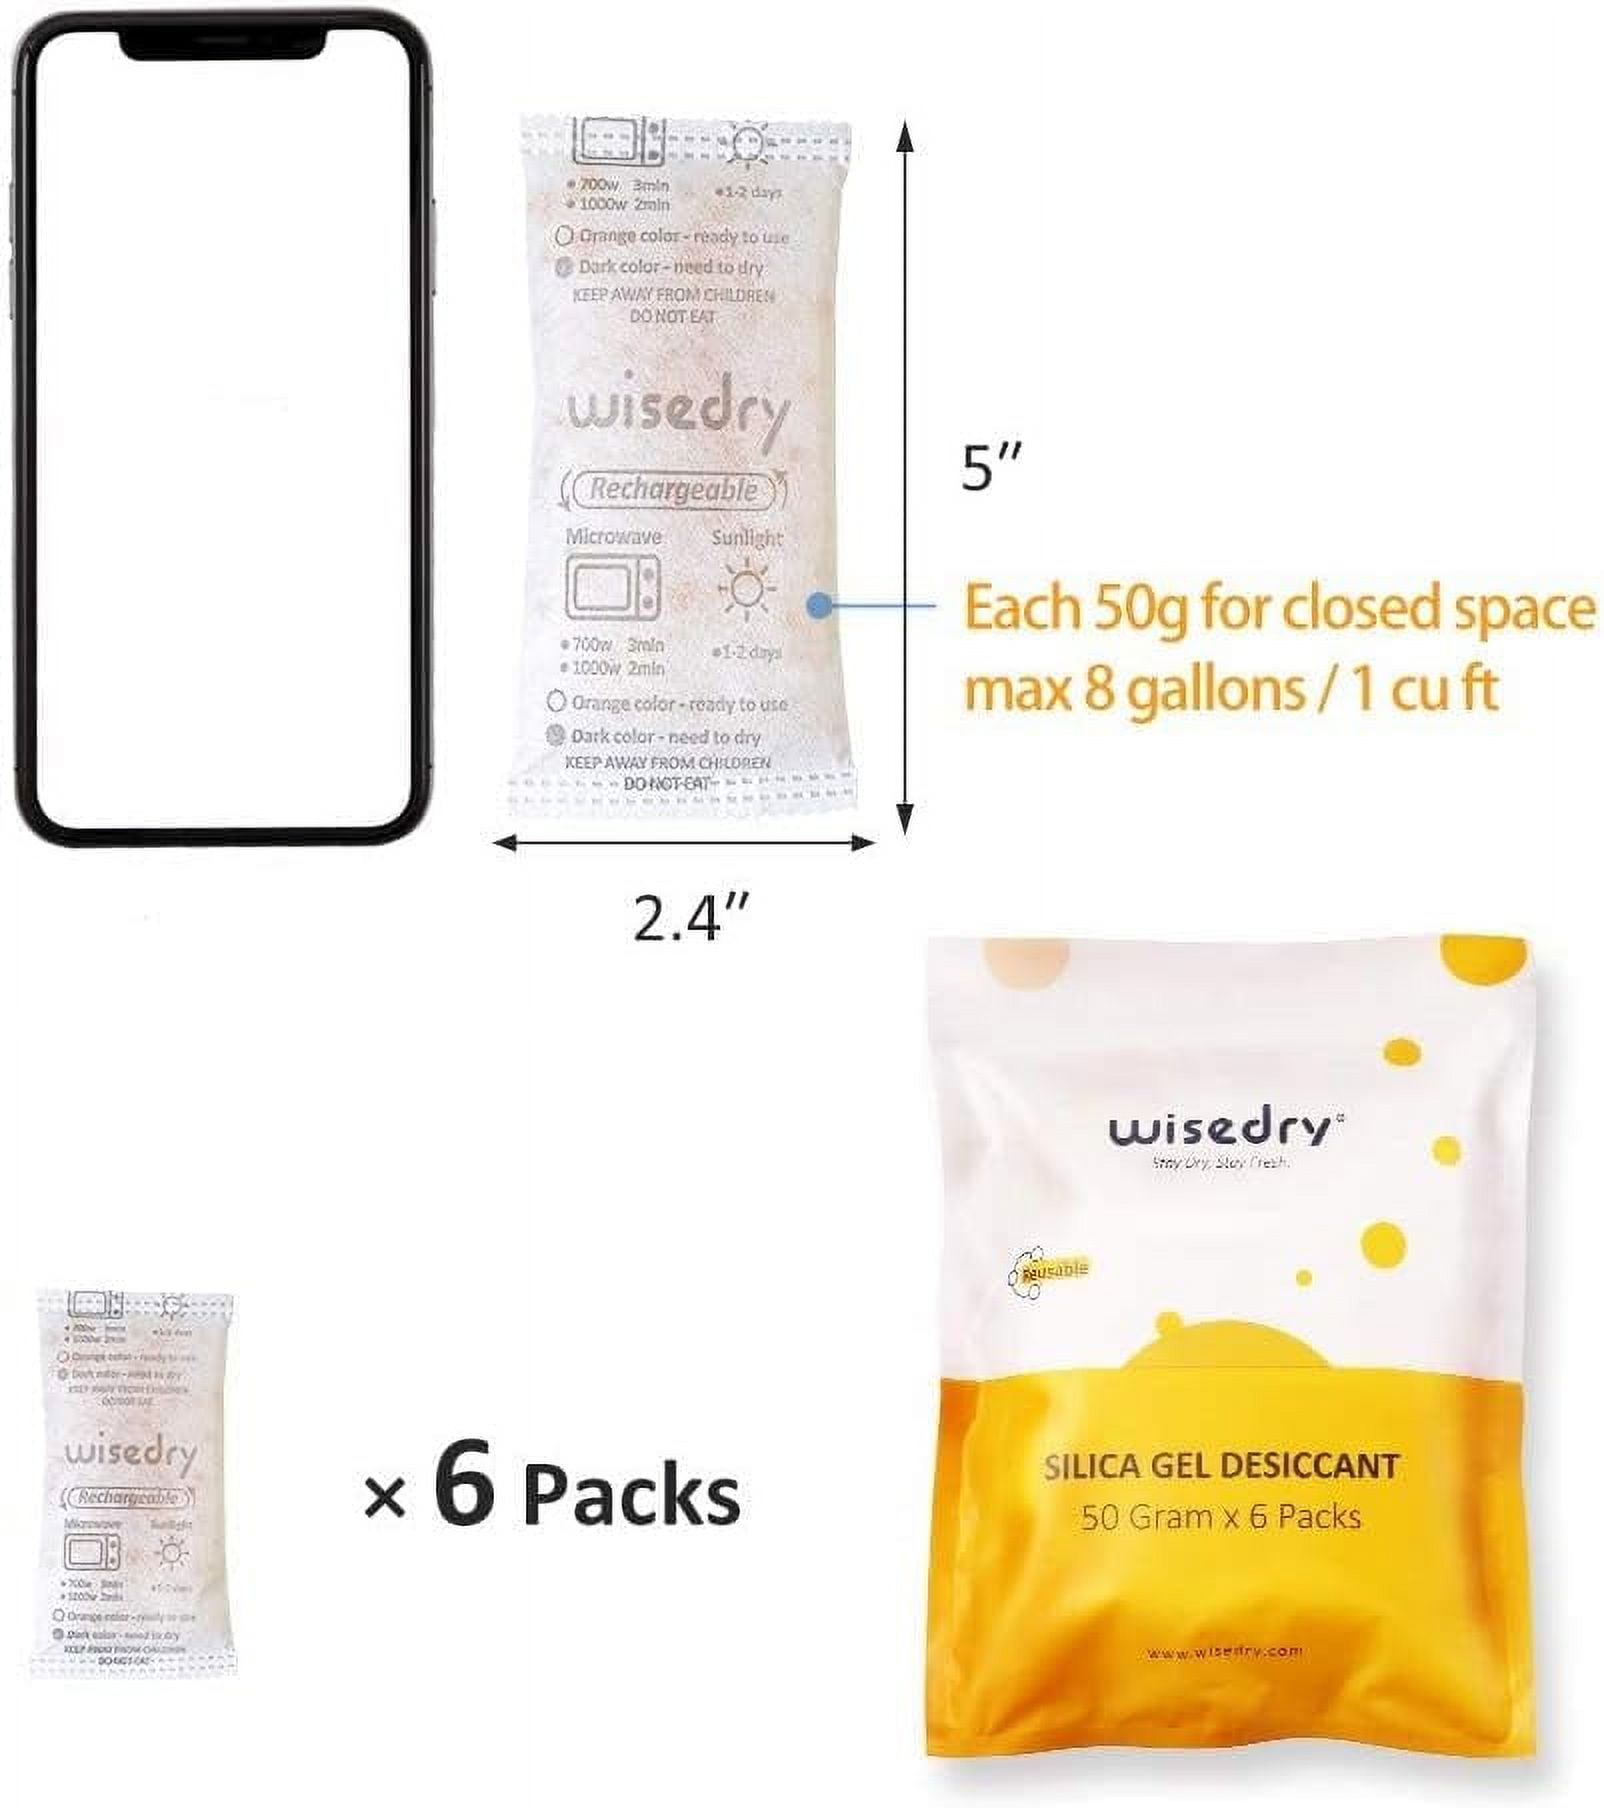 wisedry 20 Gram [12 Packs] Rechargeable Silica Gel Packets Microwave Fast  Reactivate in 2MINS Moisture Absorber Desiccant Packs with Orange  Indicating